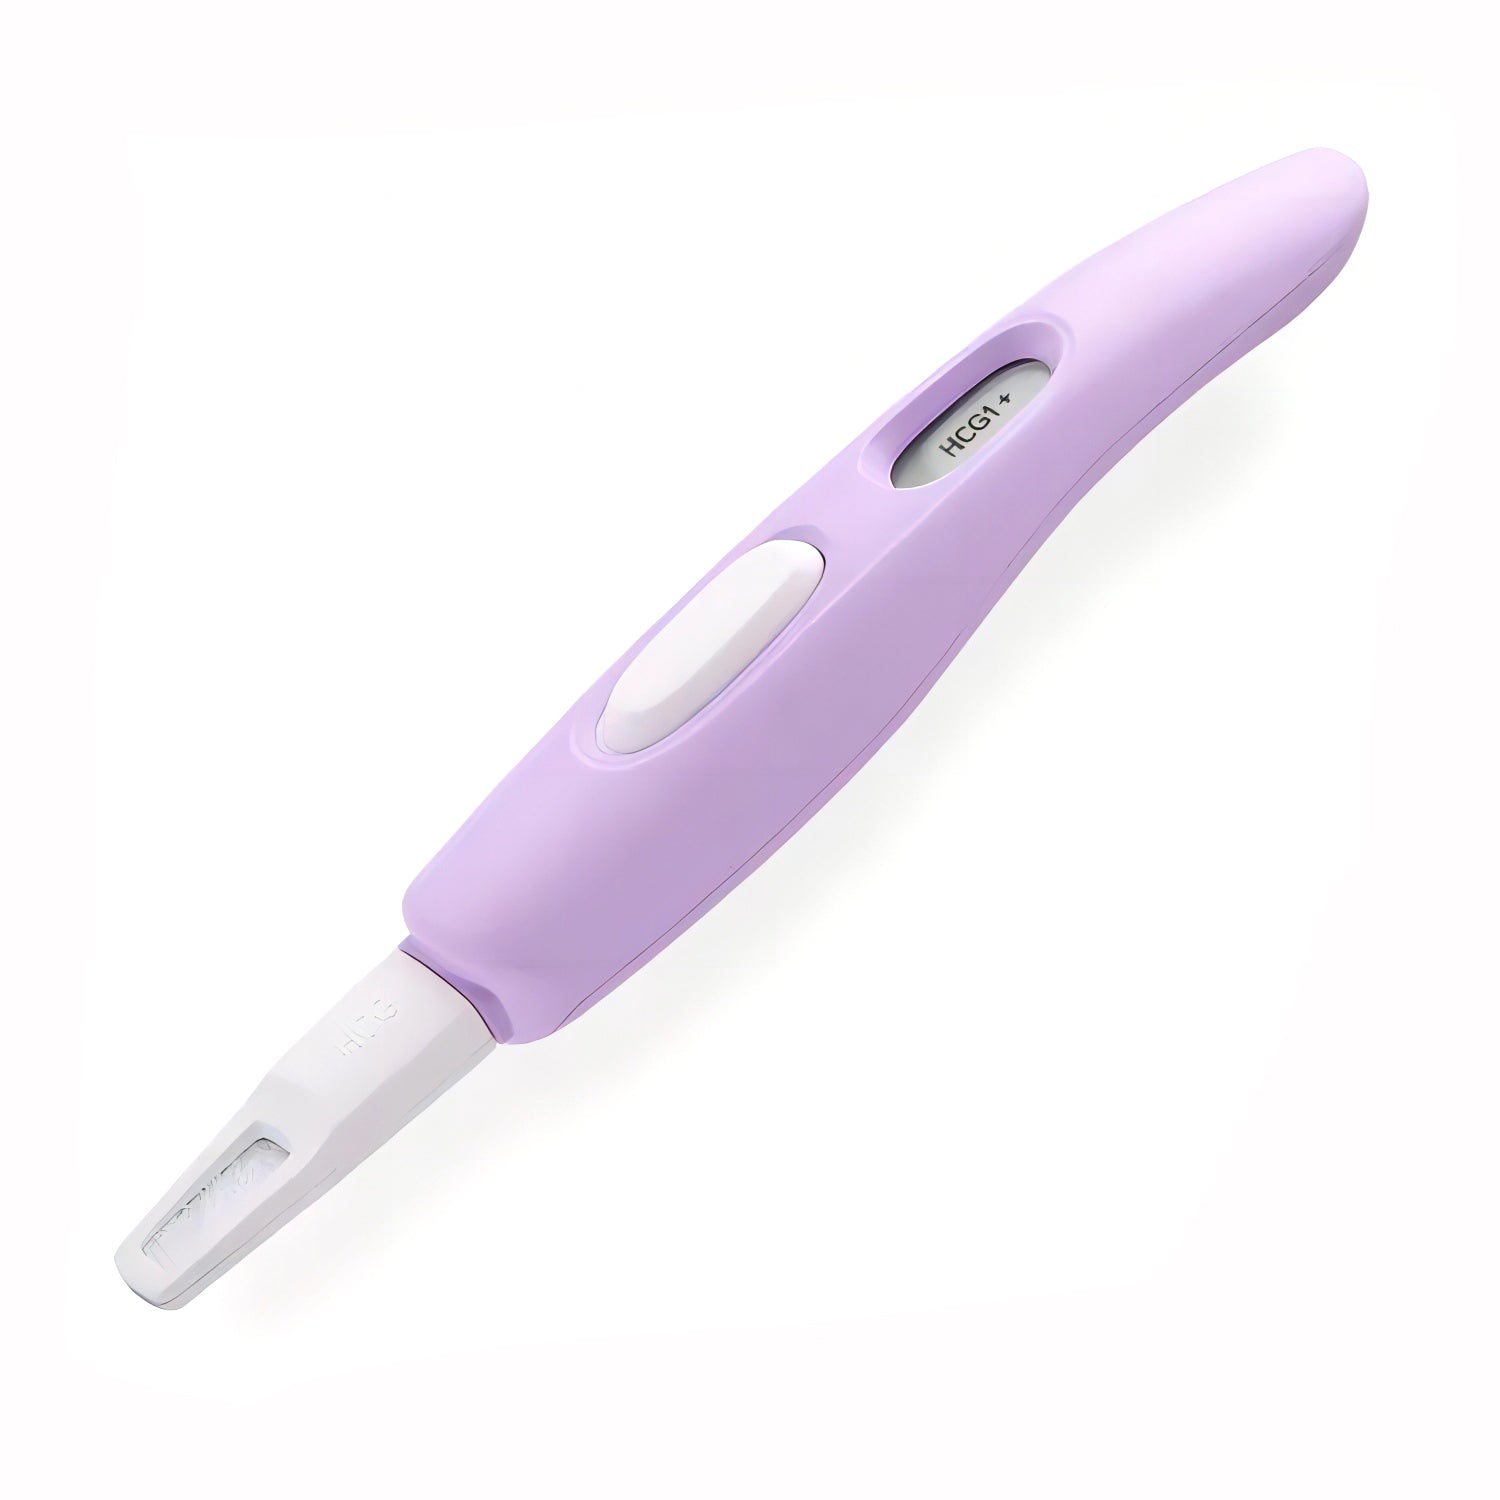 Dual-Function Pregnancy & Ovulation Test